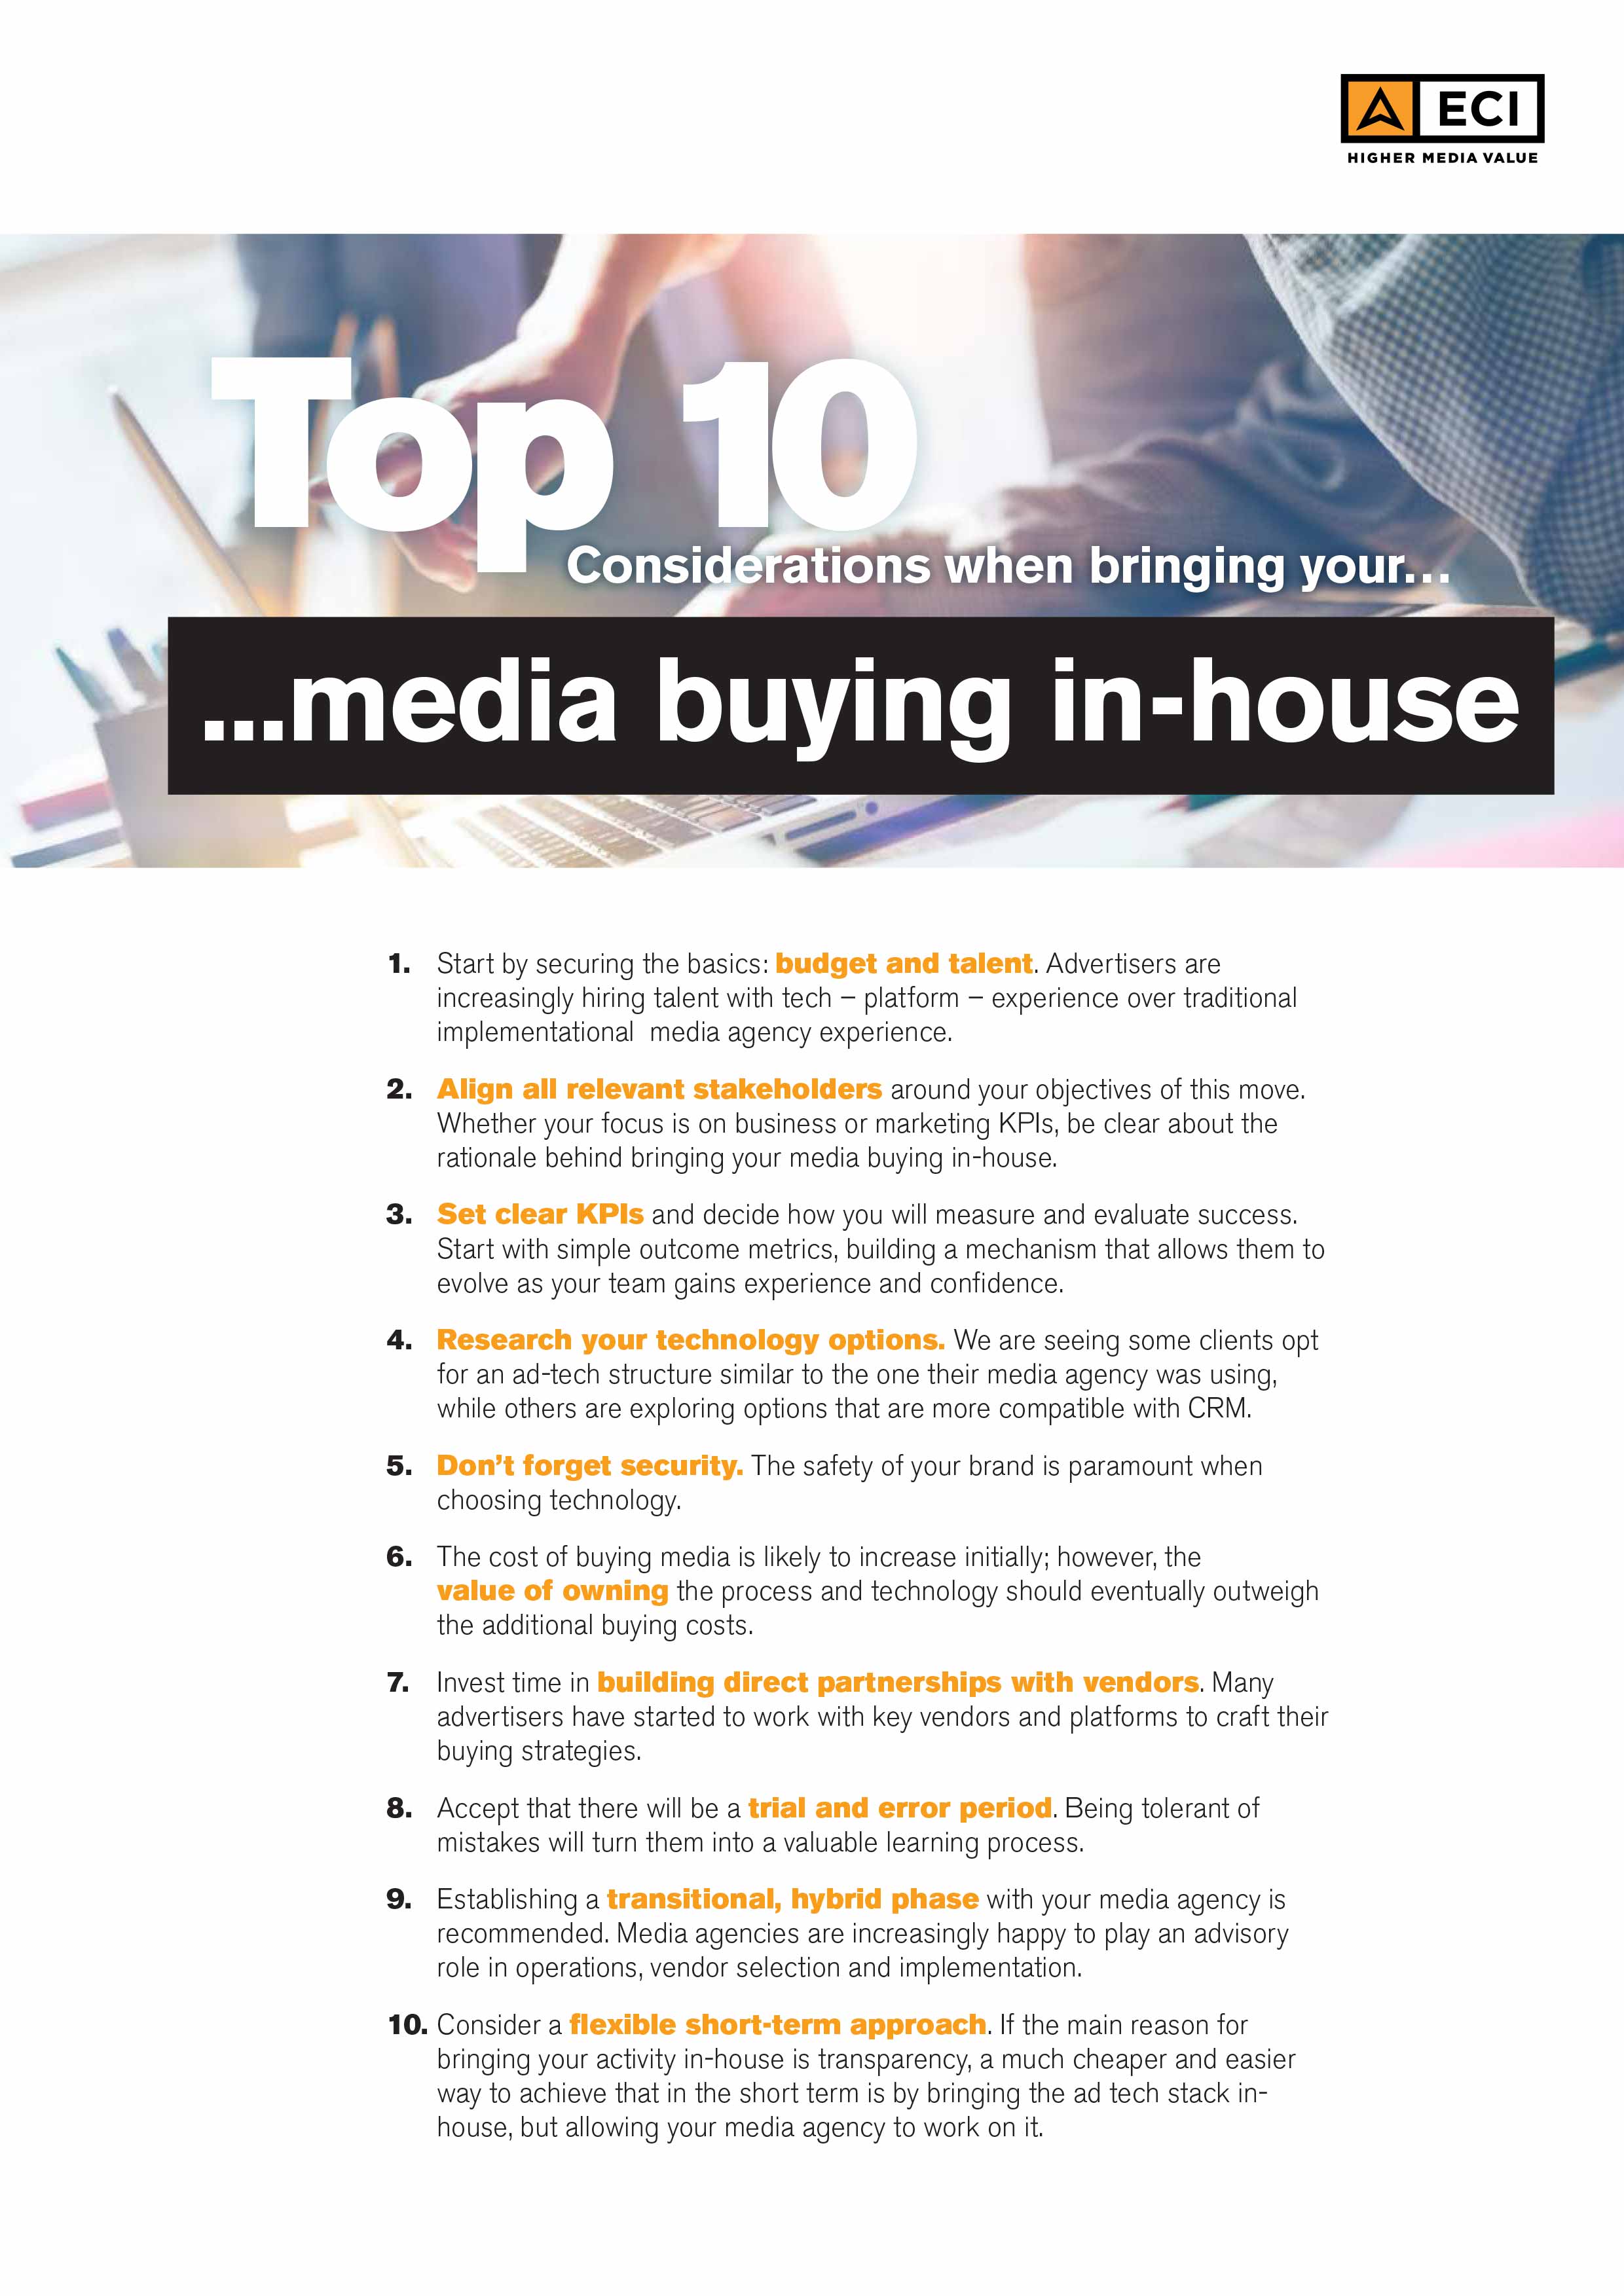 Top 10 | Considerations when bringing your media buying in-house